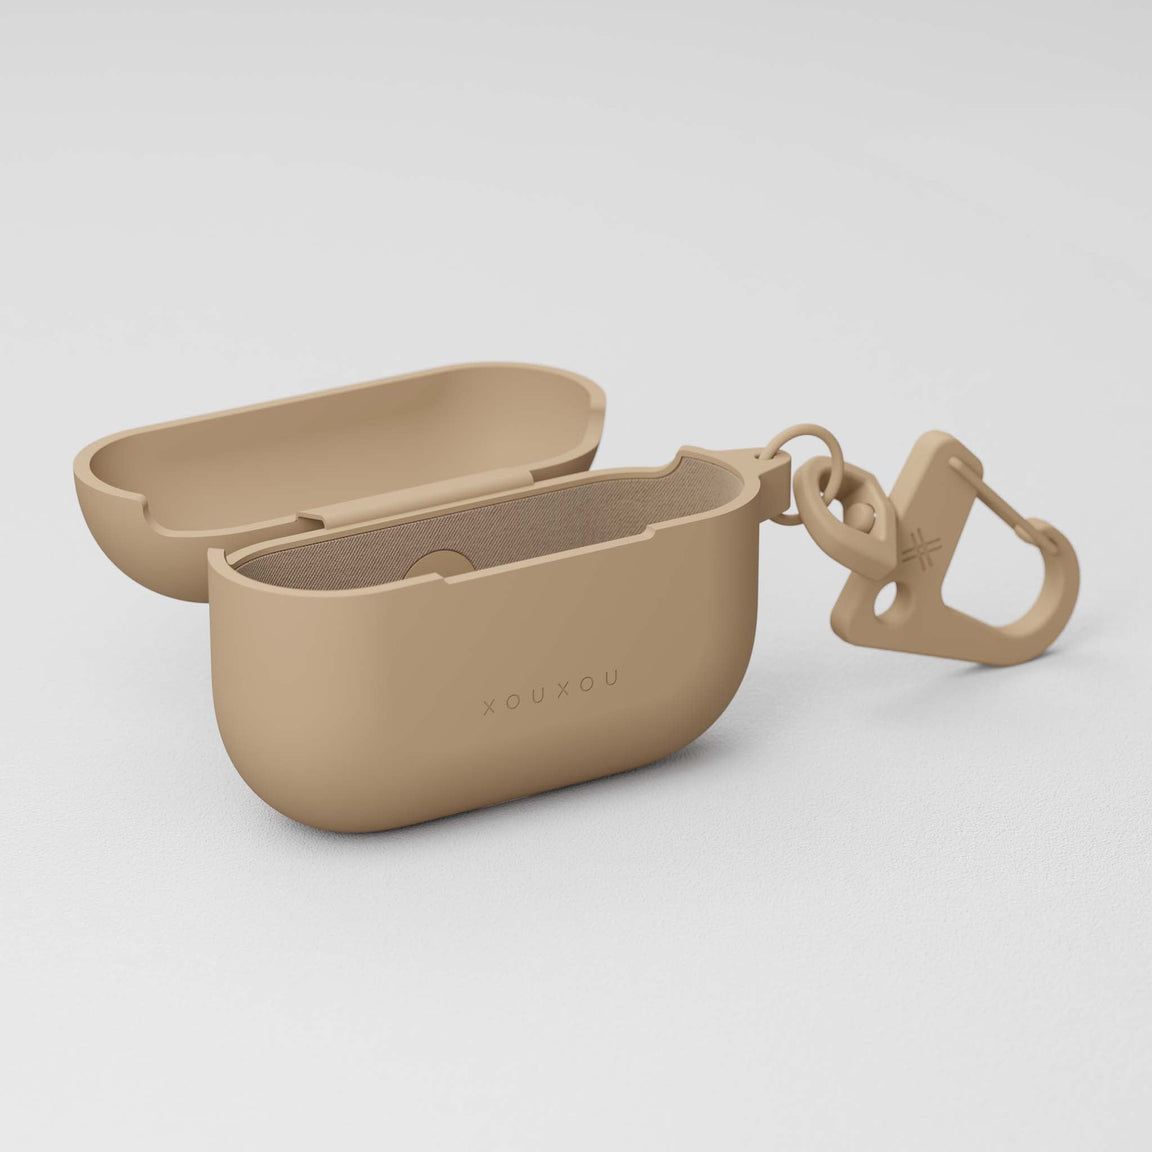 AirPods Pro case in Sand Brown soft-touch finish and carabiner hook | XOUXOU